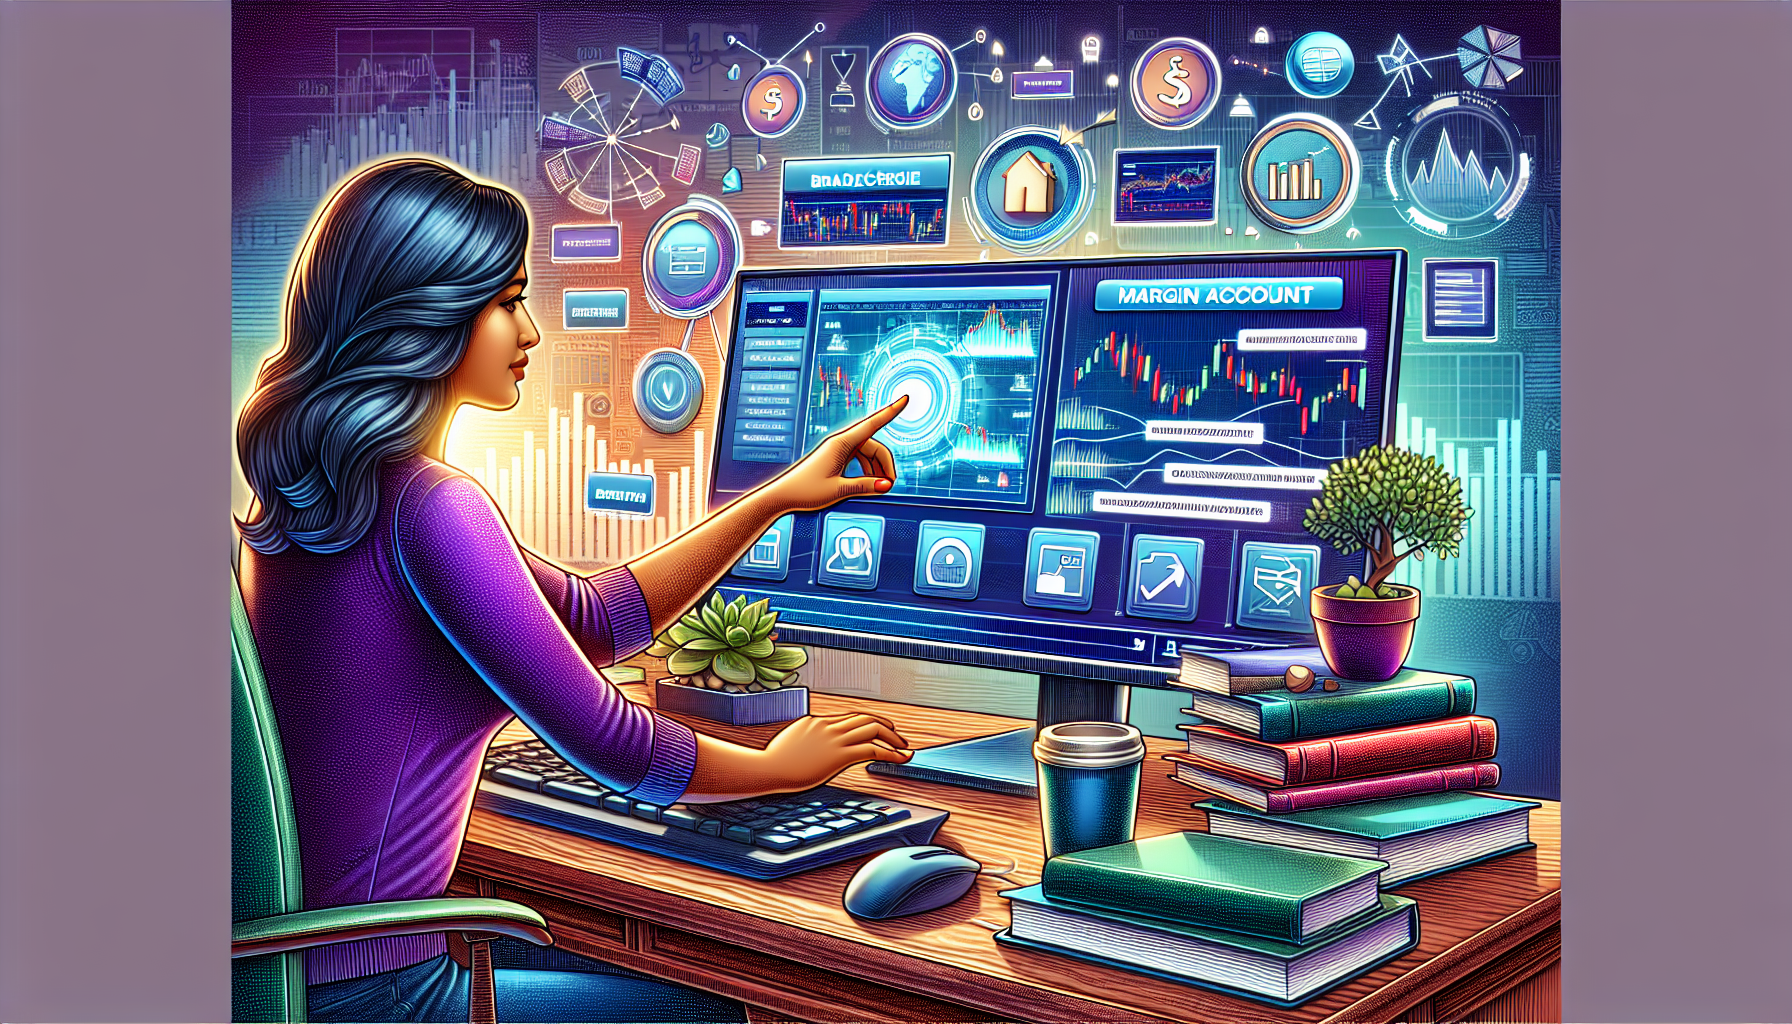 Create a detailed illustration of a person at a computer, confidently navigating an online brokerage platform. Show various financial icons, charts, and tutorials on the screen that suggest steps to open a margin account. Include a background setting of a cozy home office with financial books and a cup of coffee, emphasizing a comfortable learning environment.